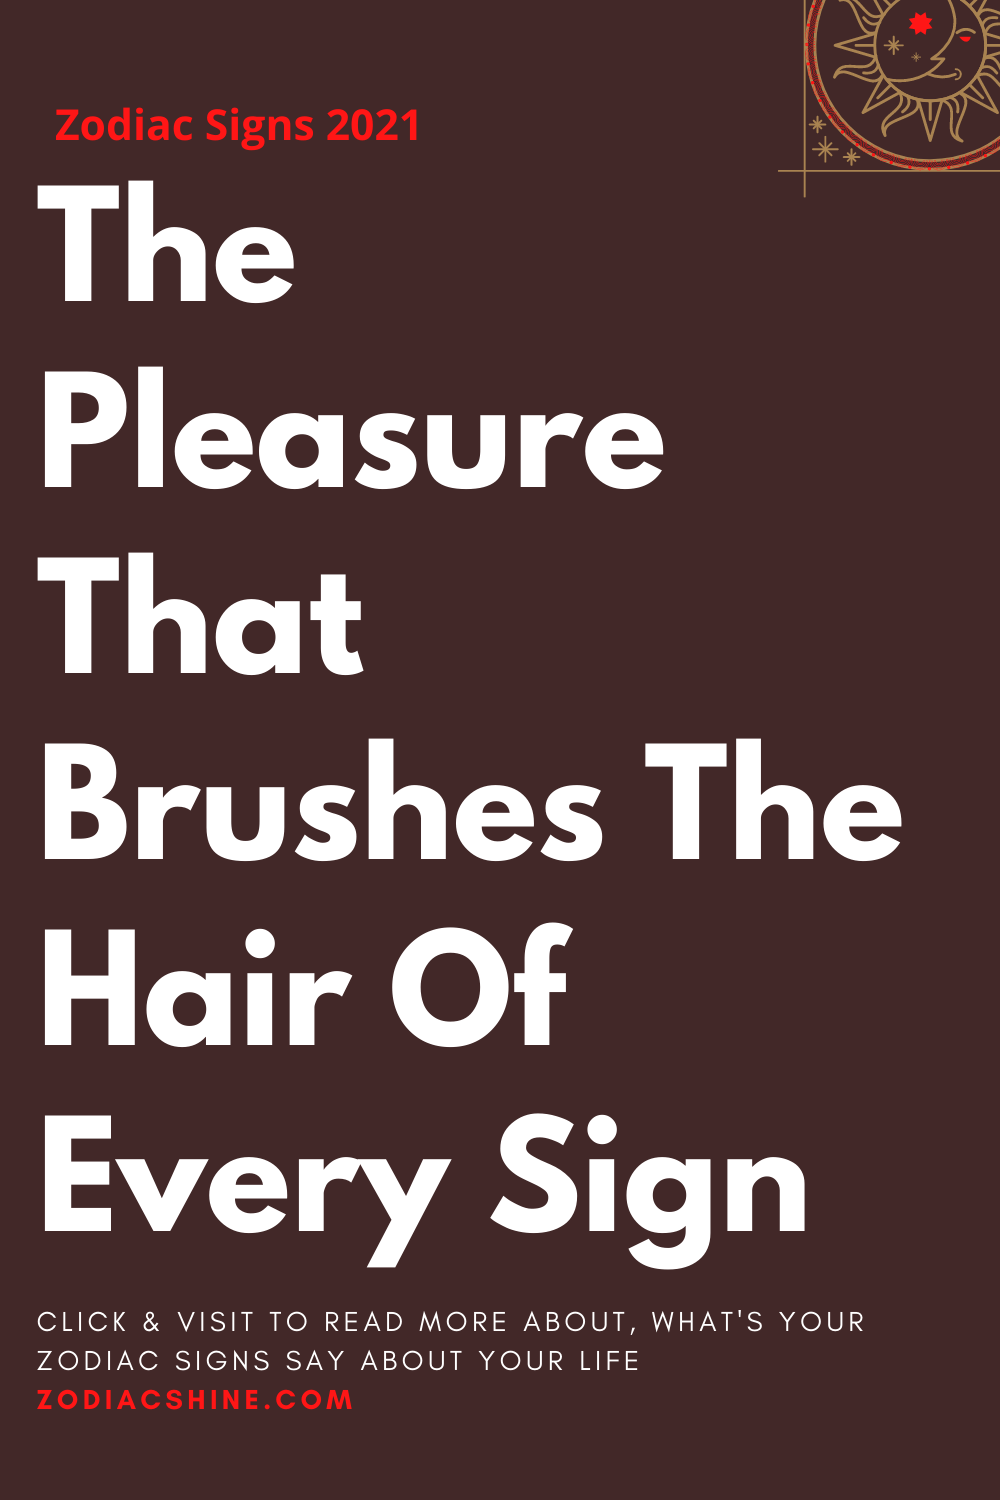 The Pleasure That Brushes The Hair Of Every Sign